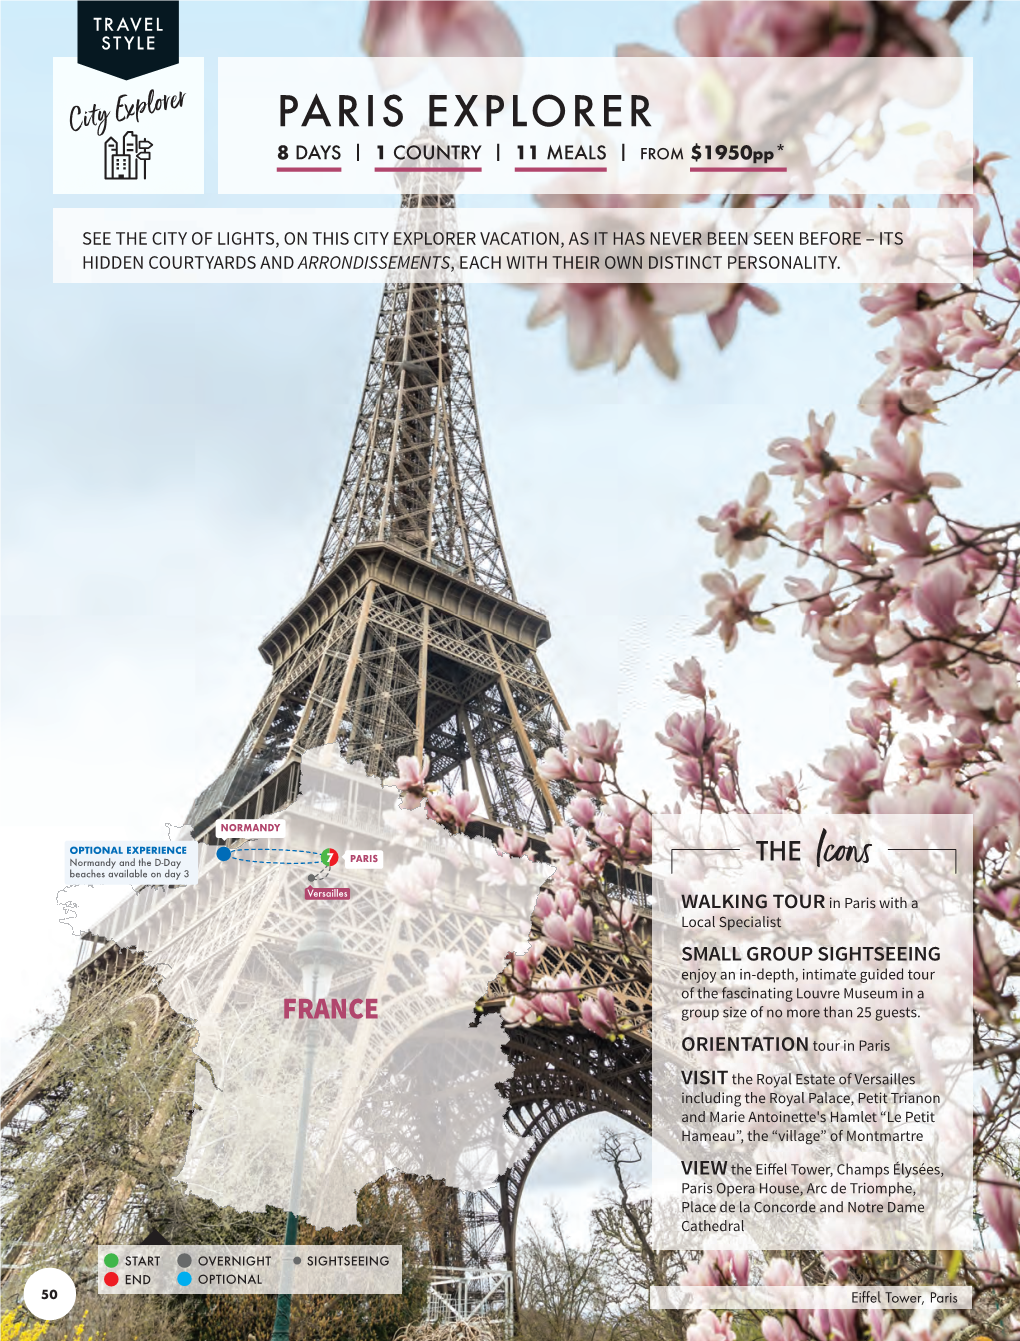 PARIS EXPLORER 8 DAYS | 1 COUNTRY | 11 MEALS | from $1950 Pp *